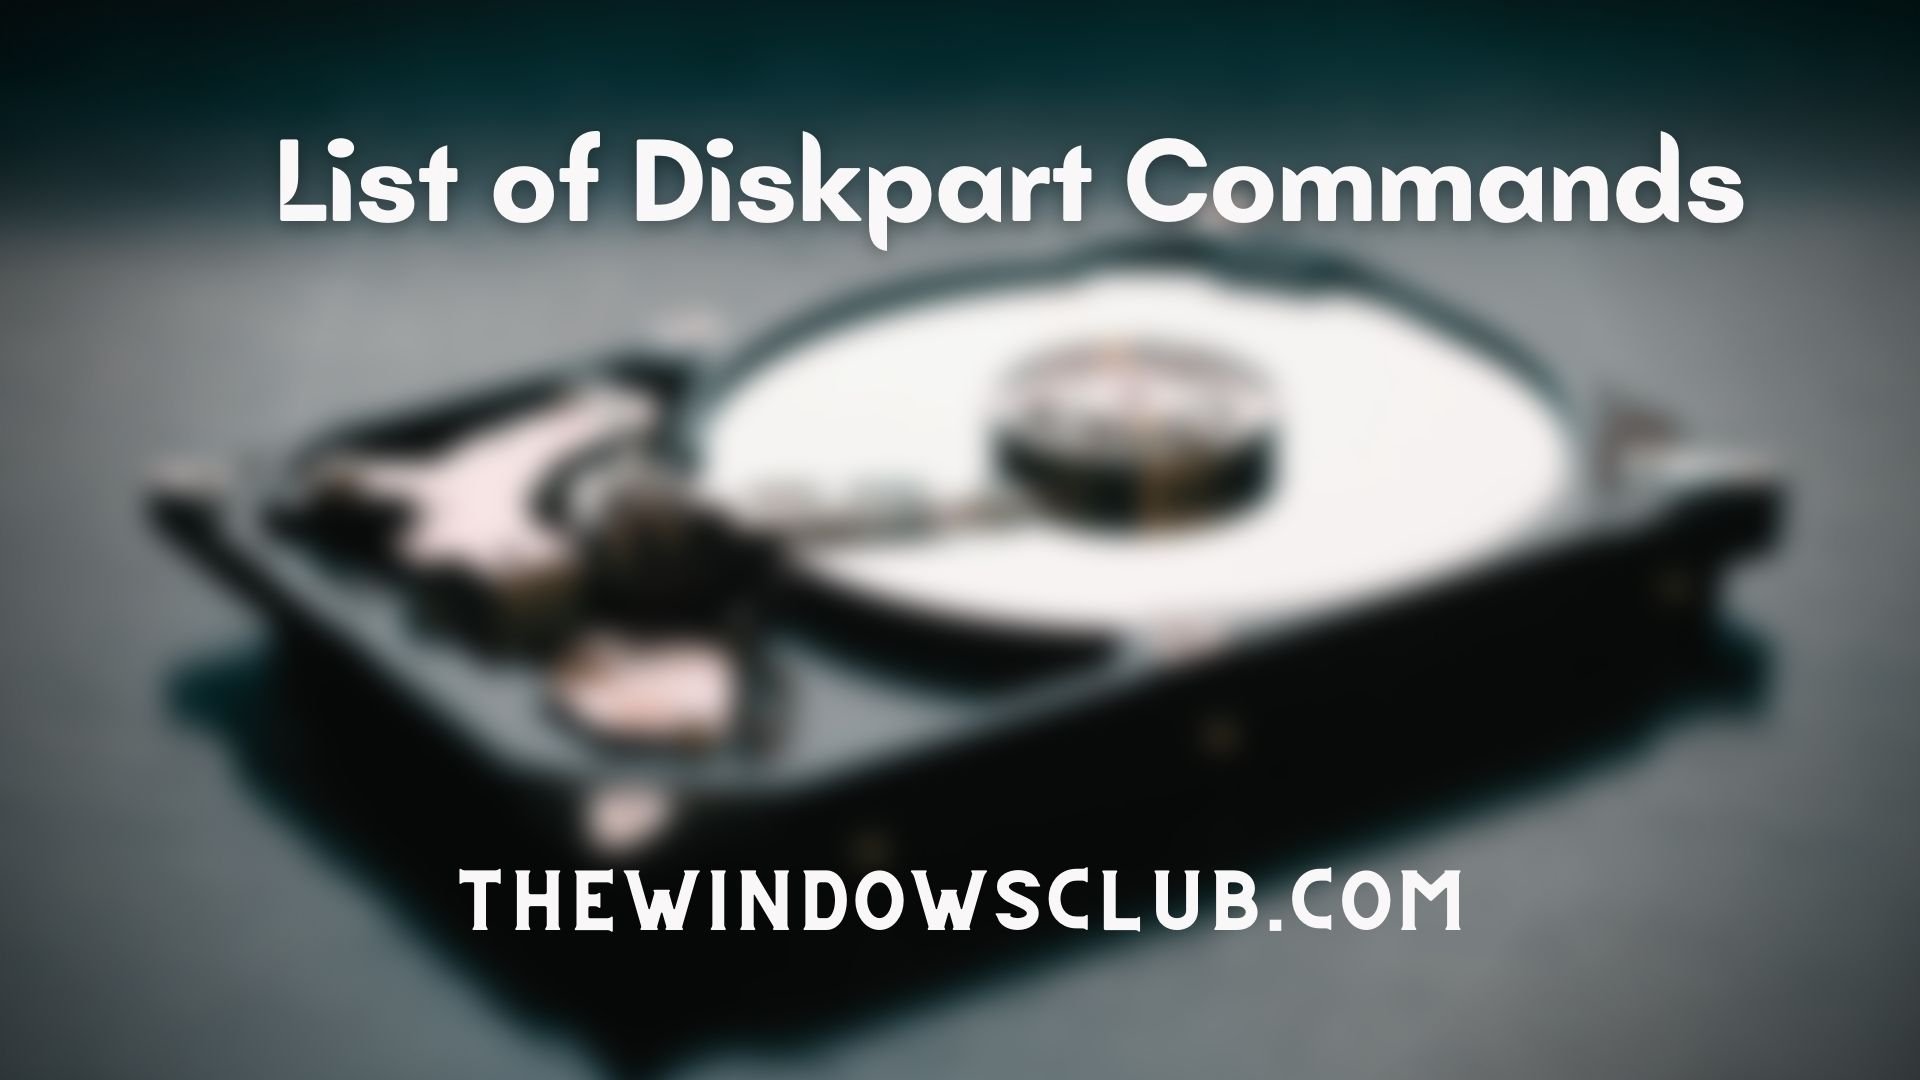 List of DISKPART commands and How to use them in Windows 11/10 List-of-Diskpart-Commands.jpg